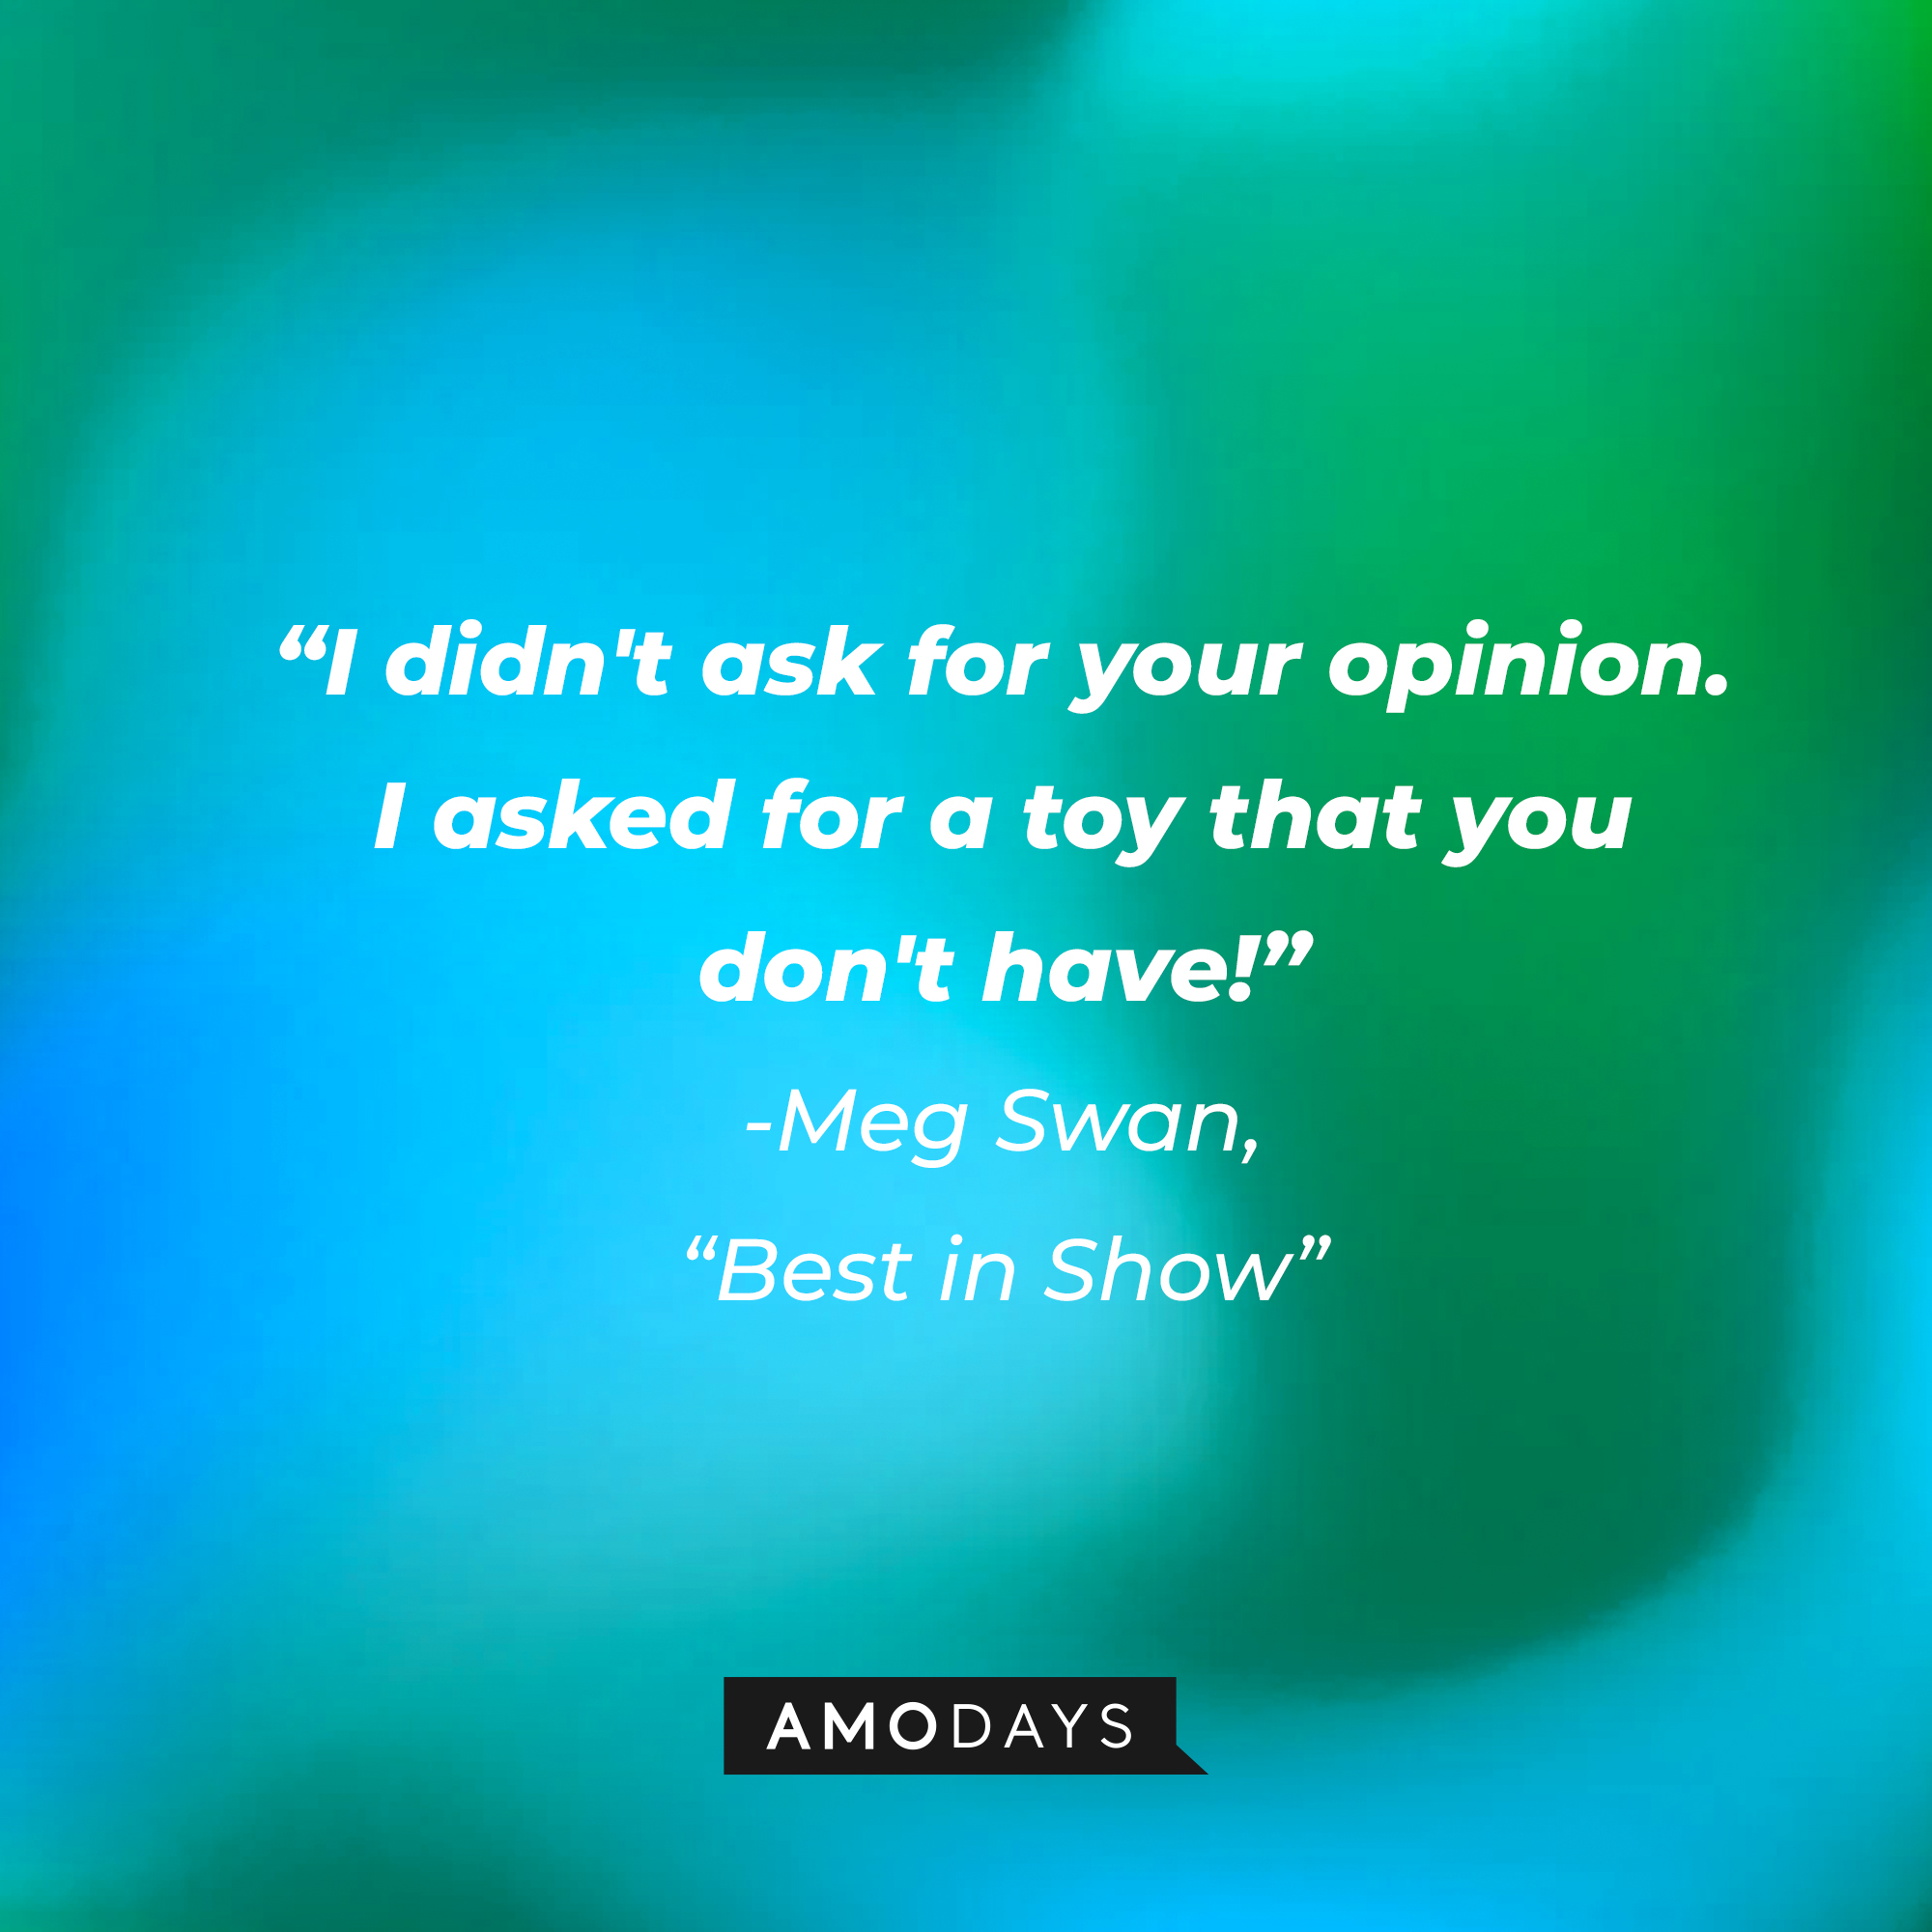 Meg Swan's quote in "Best in Show:" "I didn't ask for your opinion. I asked for a toy that you don't have!" | Source: AmoDays